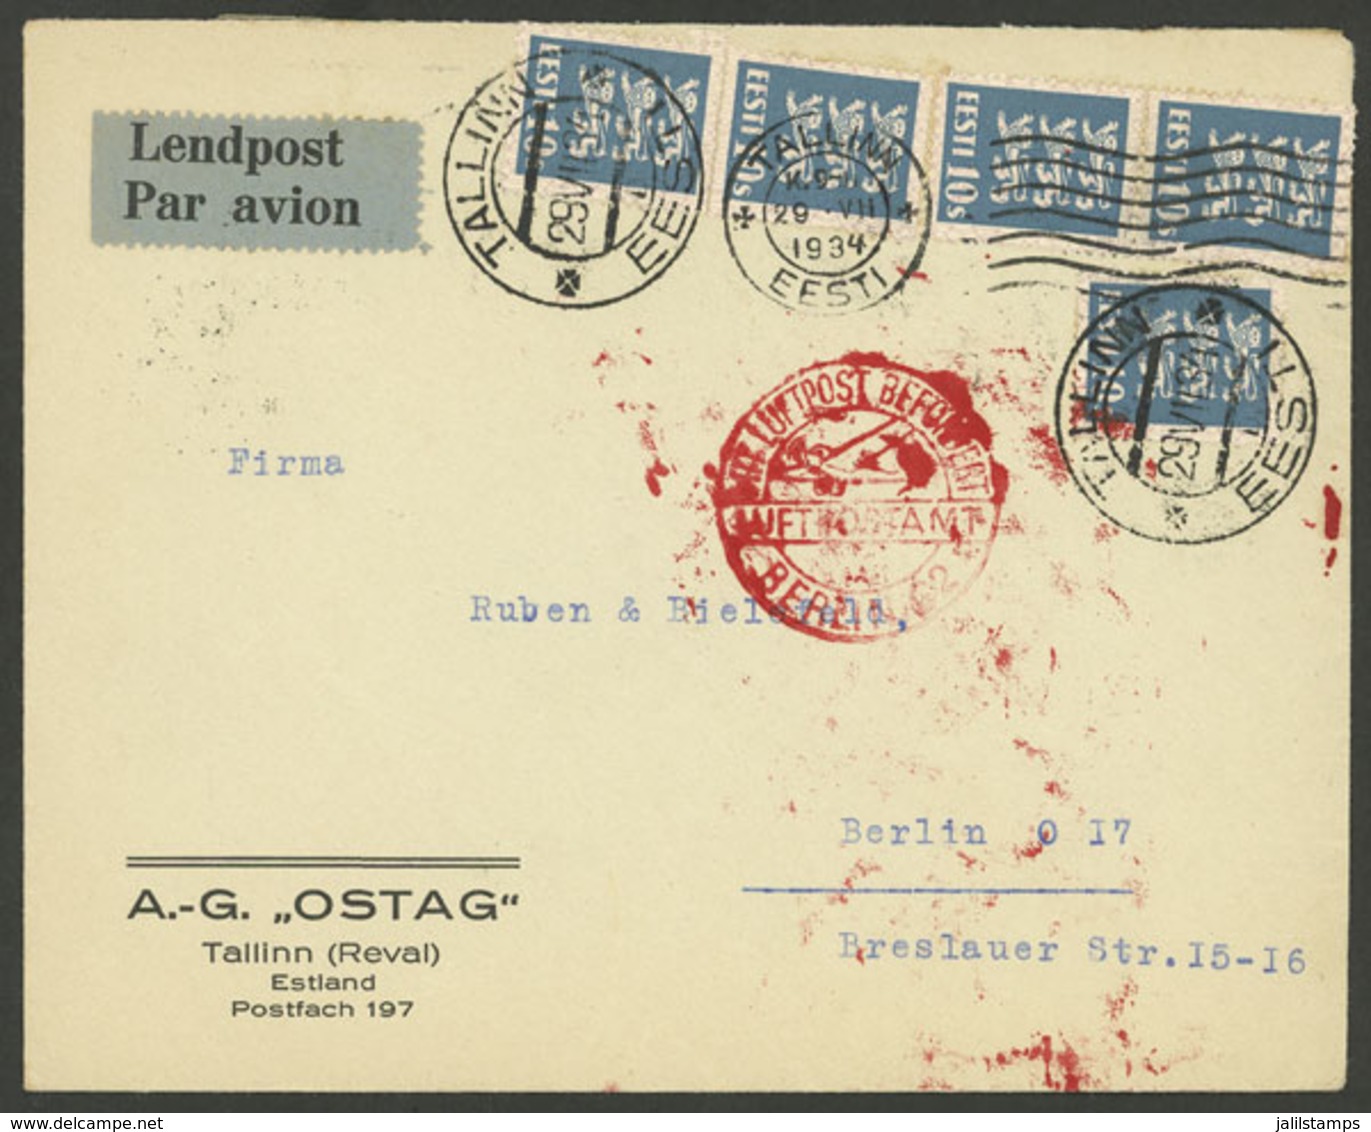 ESTONIA: 29/JUL/1934 Tallinn - Berlin, Airmail Cover Sent By DLH Franked With 50s., With Arrival Backstamp For The Same  - Estonie